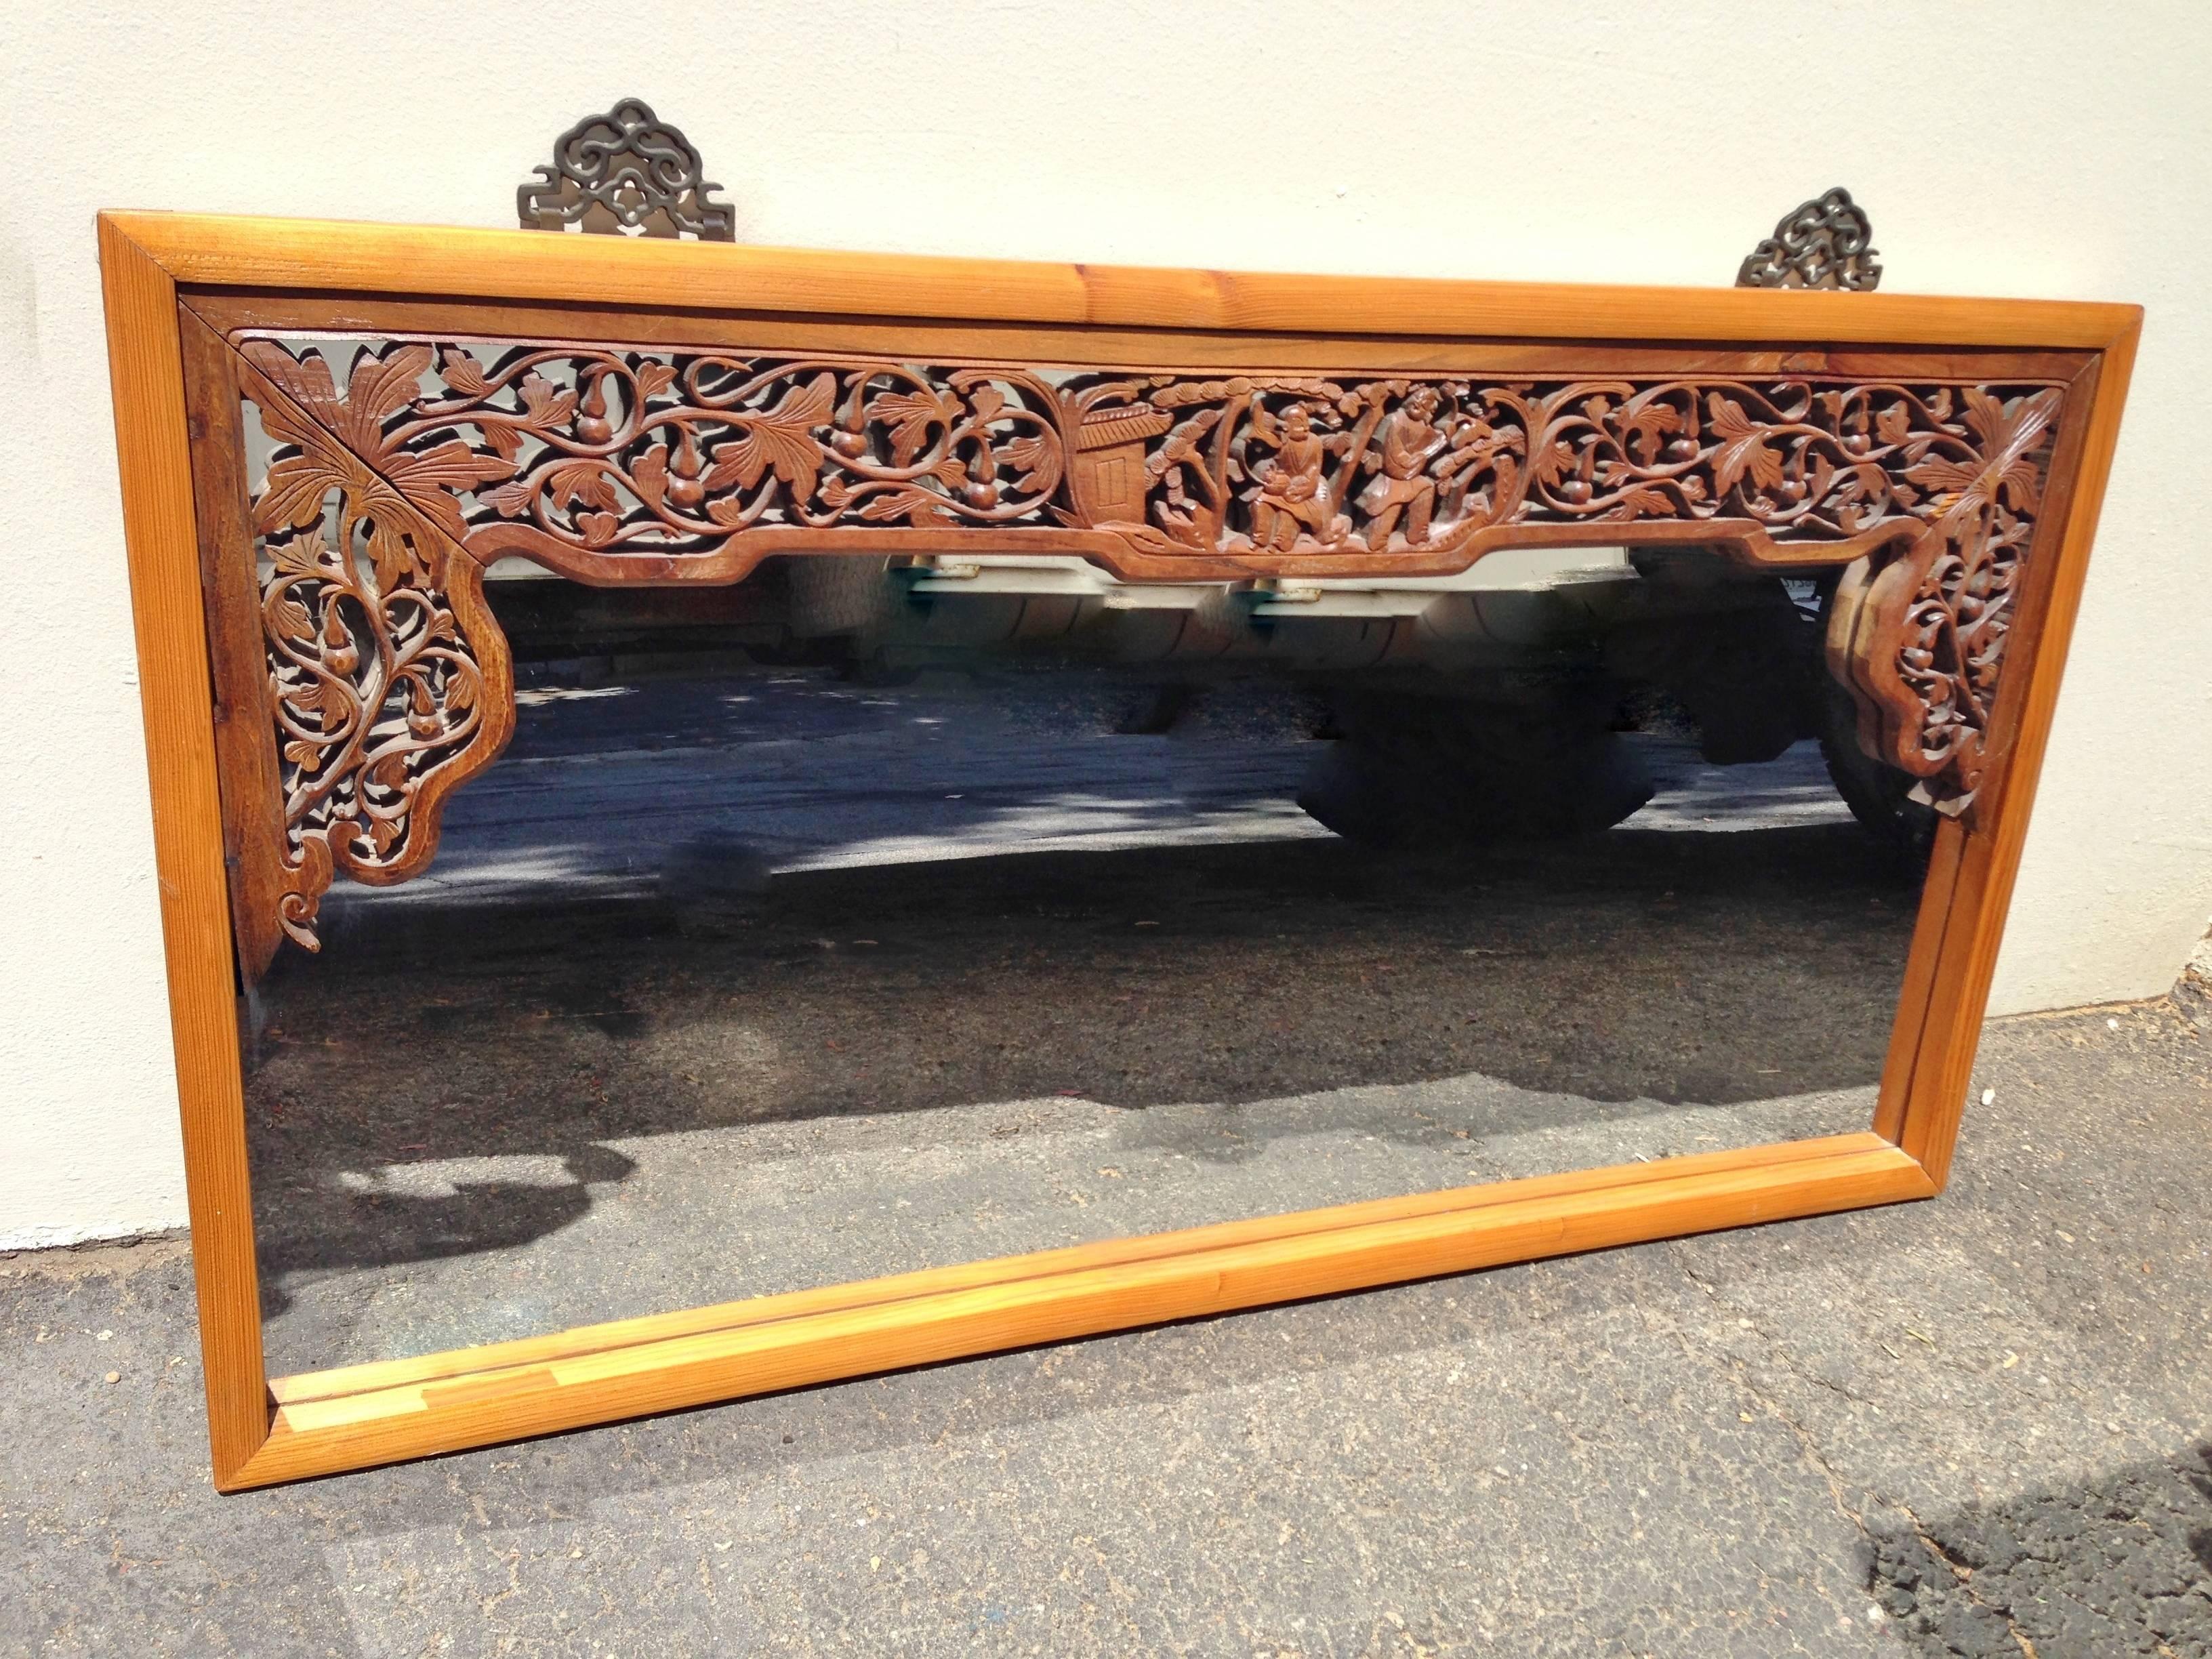 Our beautiful mirror is made with antique carved screen. The Chinese harmony gods 